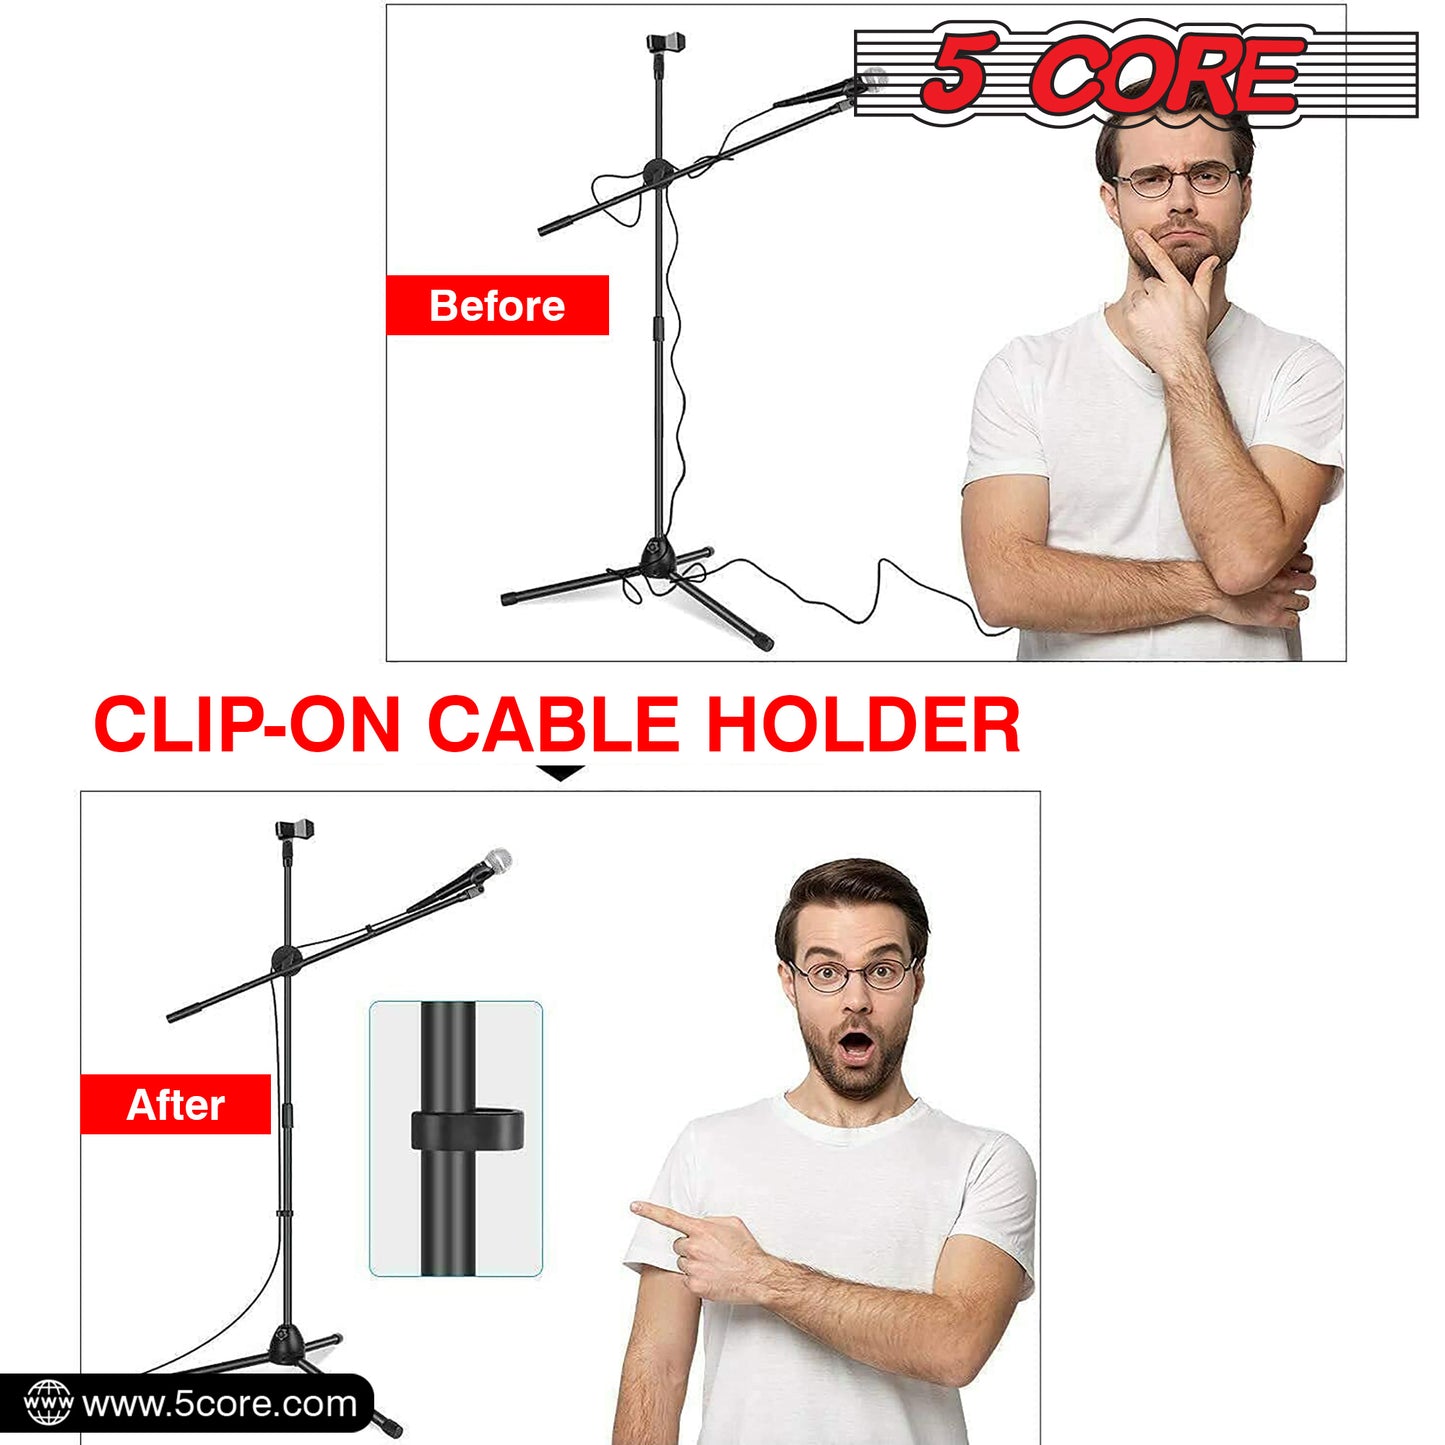 5 Core Microphone Stand Boom w Tripod Base Foldable Adjustable Height Up to 86 Inches 360 Degree Rotating W Dual Mic Holder & Golden Mic Screw Singing Speech Stage Outdoor Black MS DBL